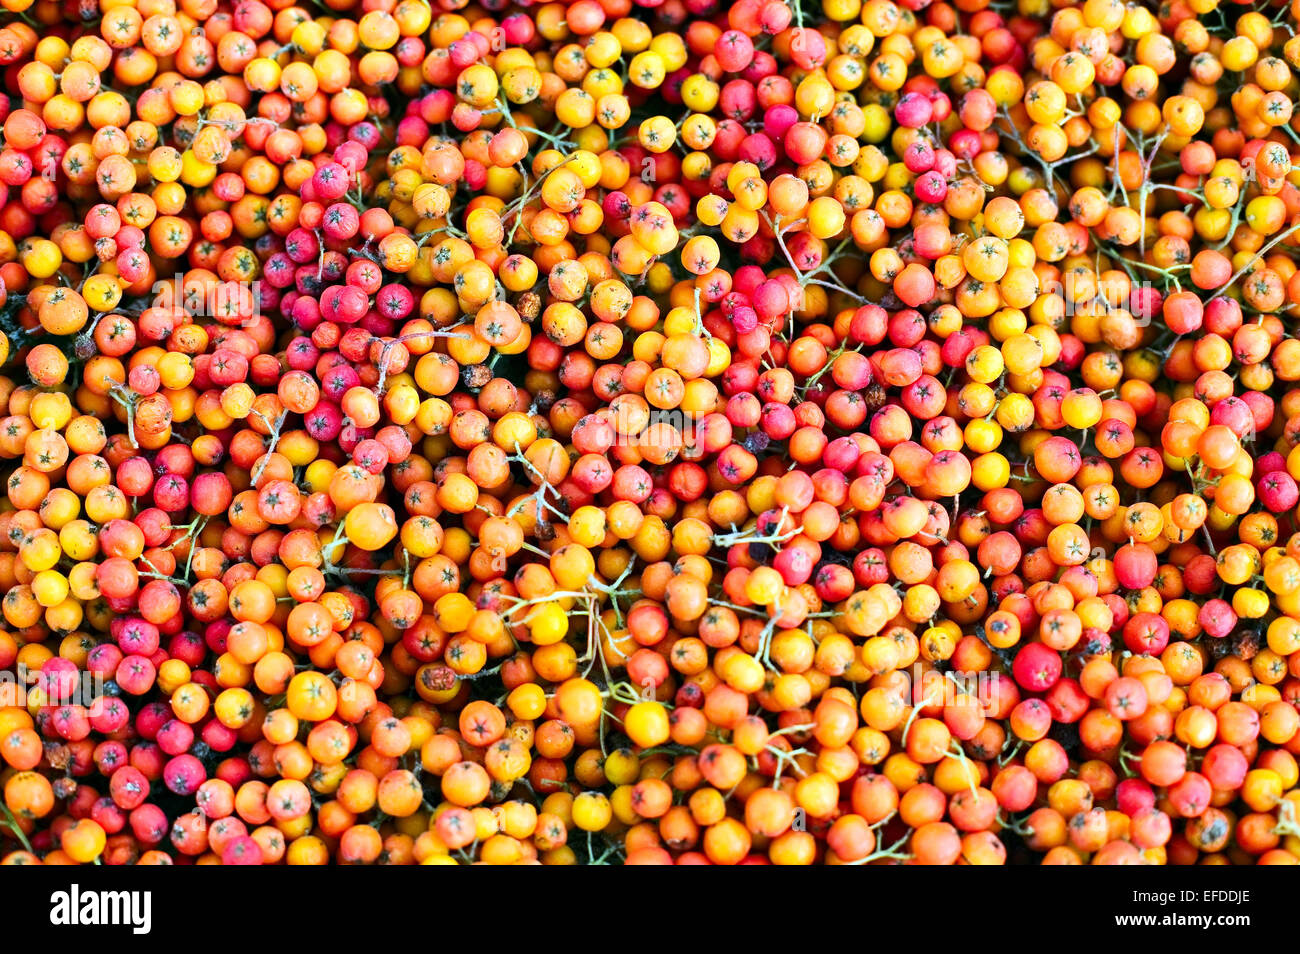 Artistic colorful art from different a berries Stock Photo